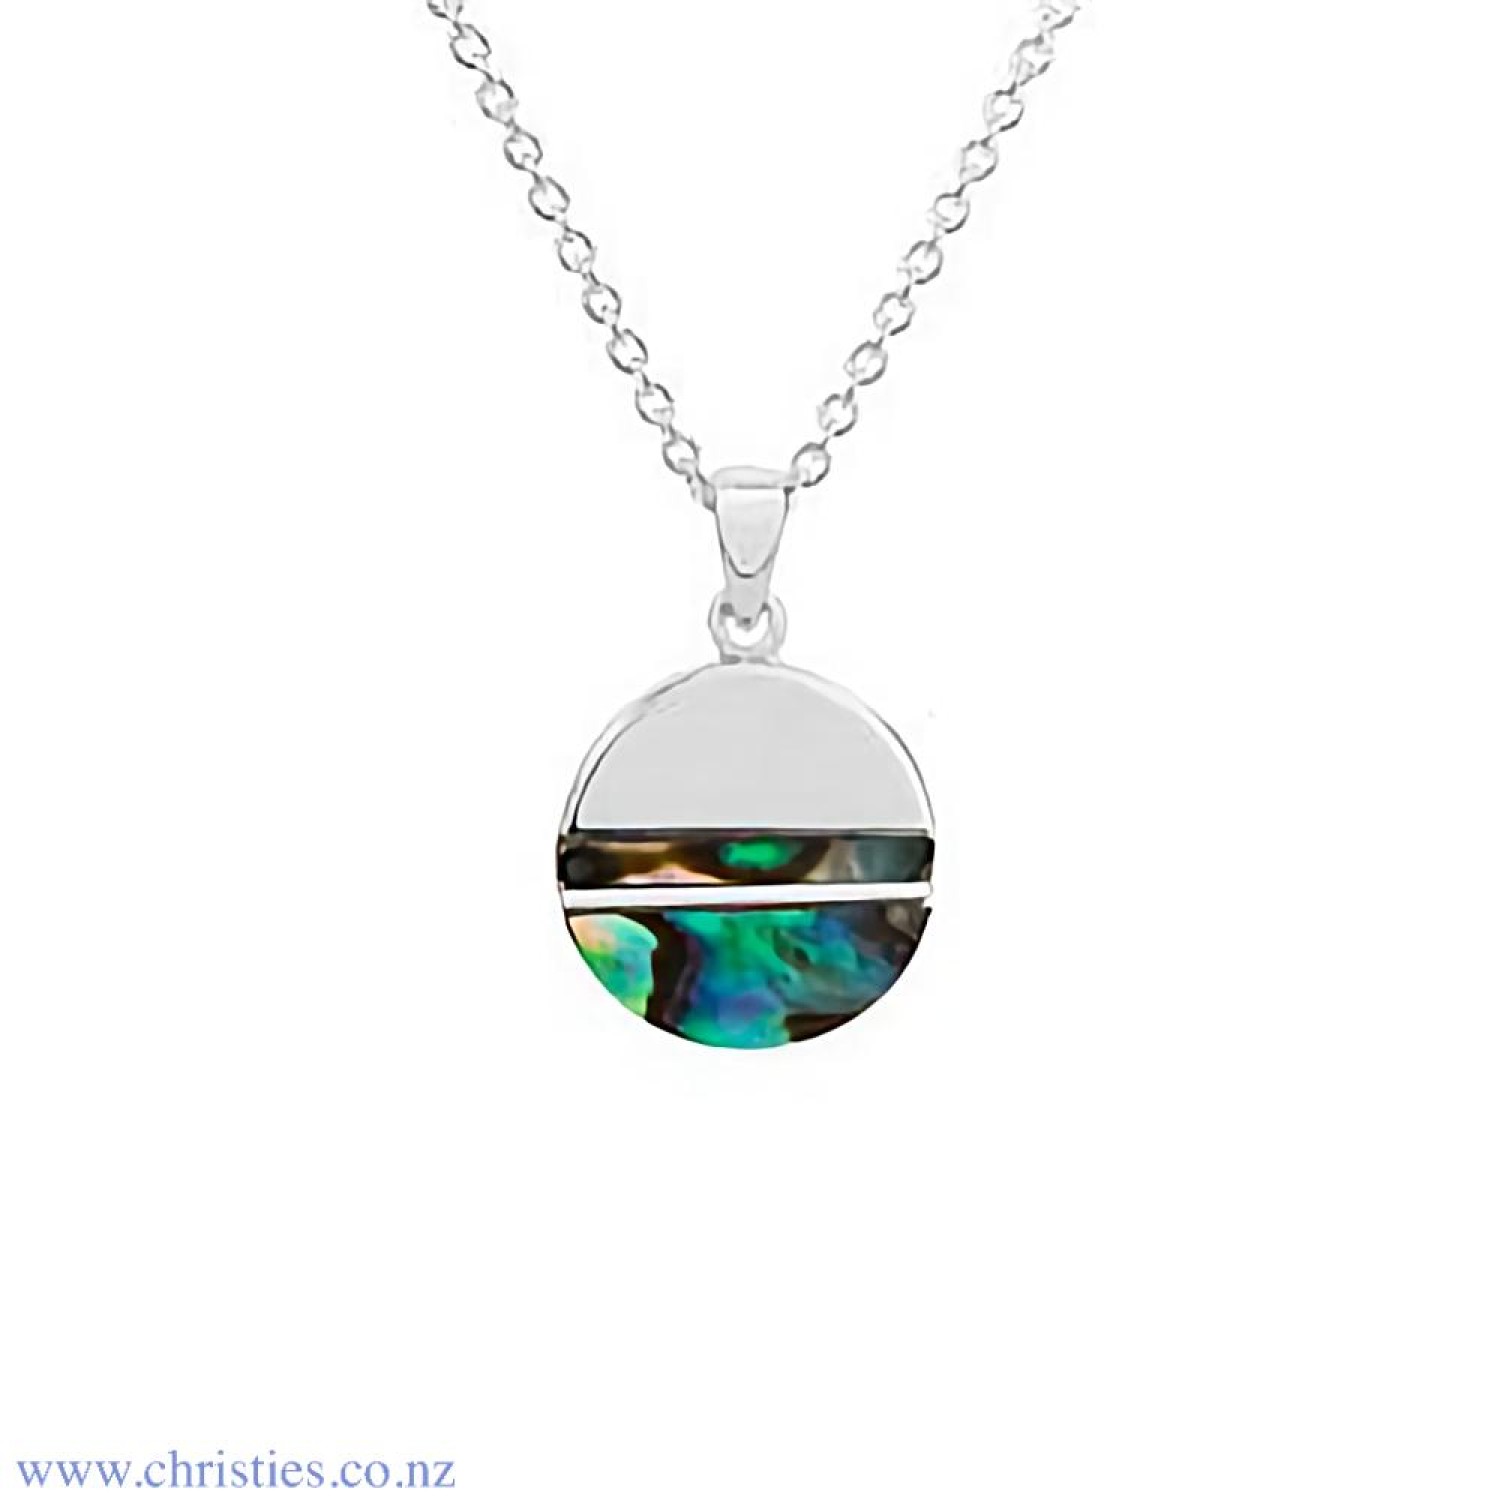 4N40014 Evolve Treasured Paua Silver Pendant. Evolves Cherished Pāua Necklace captures the sun setting on the horizon, reminding us to reﬂect and celebrate each day. Inlaid with New Zealand pāua shell, which Māori believe to be a treasured gift from the s